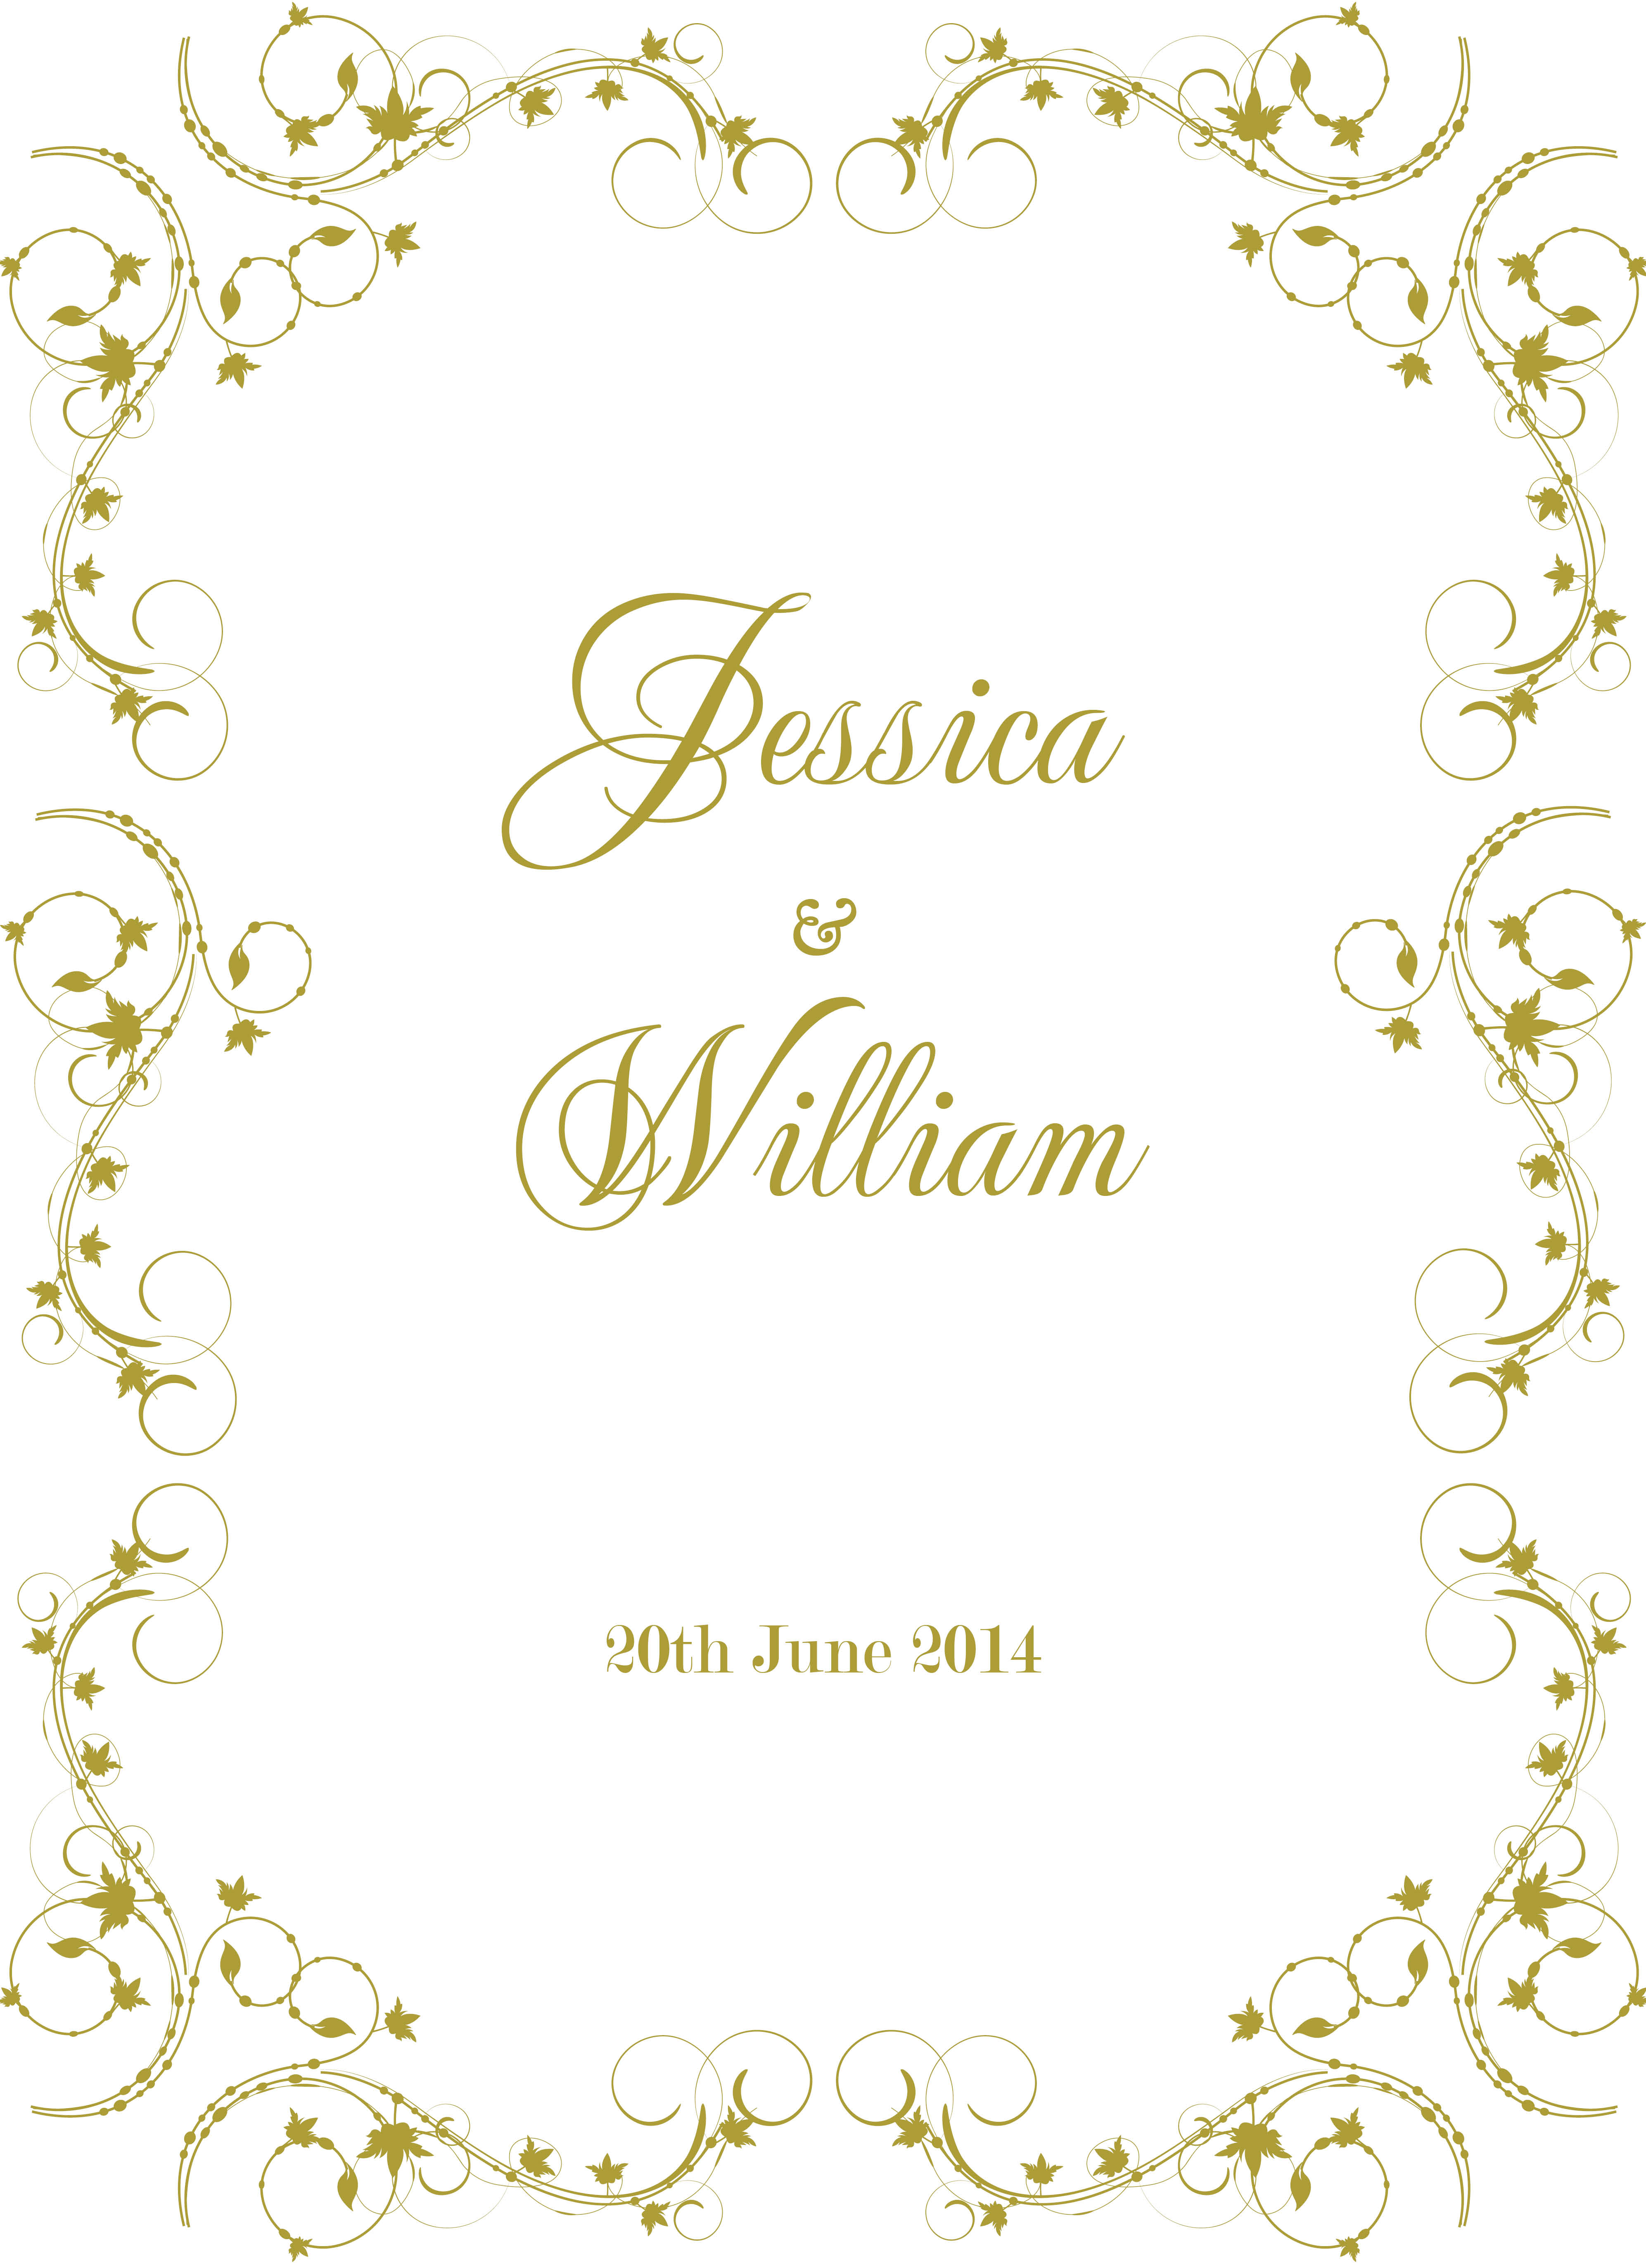 Free Invitation Borders, Download Free Invitation Borders png images